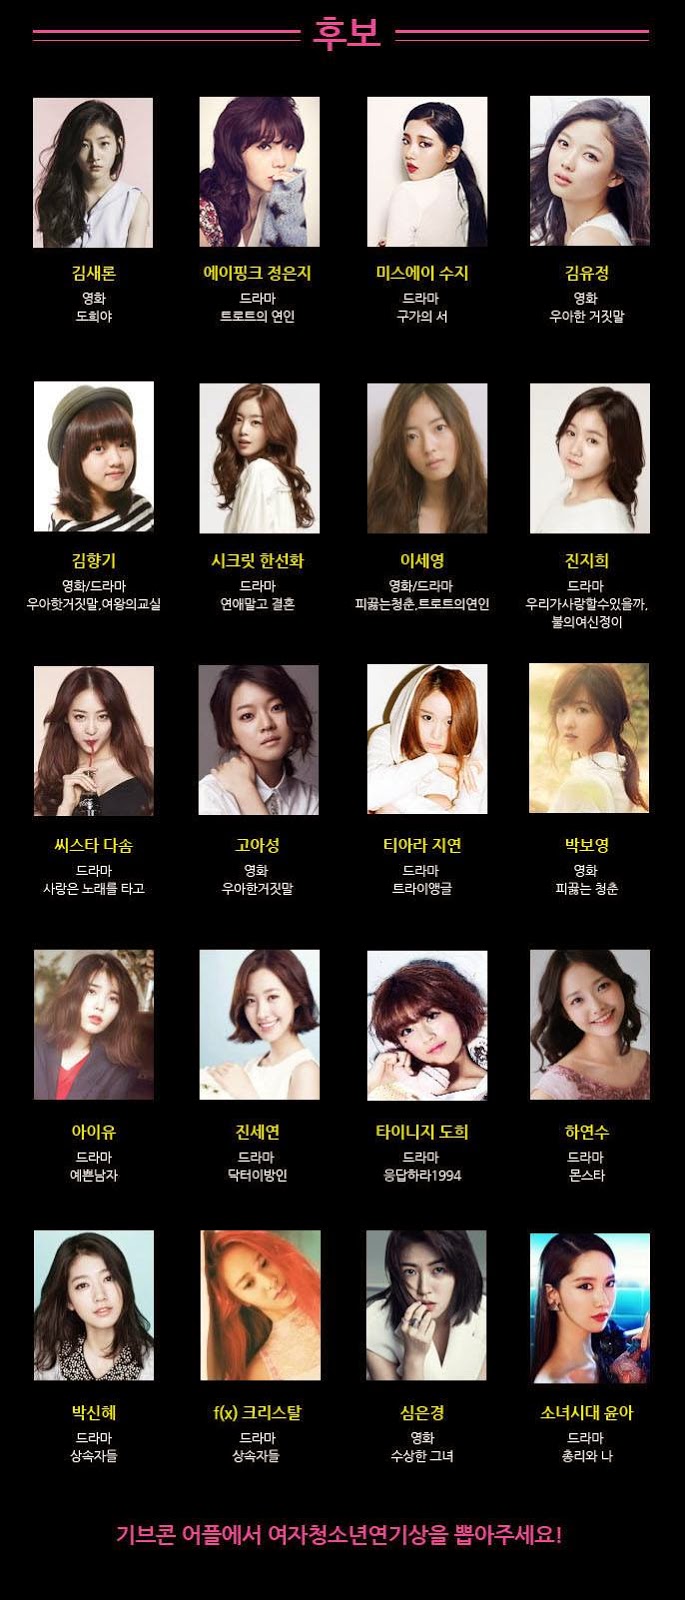 T-ara's JiYeon is nominated in the 16th Seoul International Youth Film Festival! T-ara+jiyeon+16th+Seoul+Internation+Youth+Film+Festival